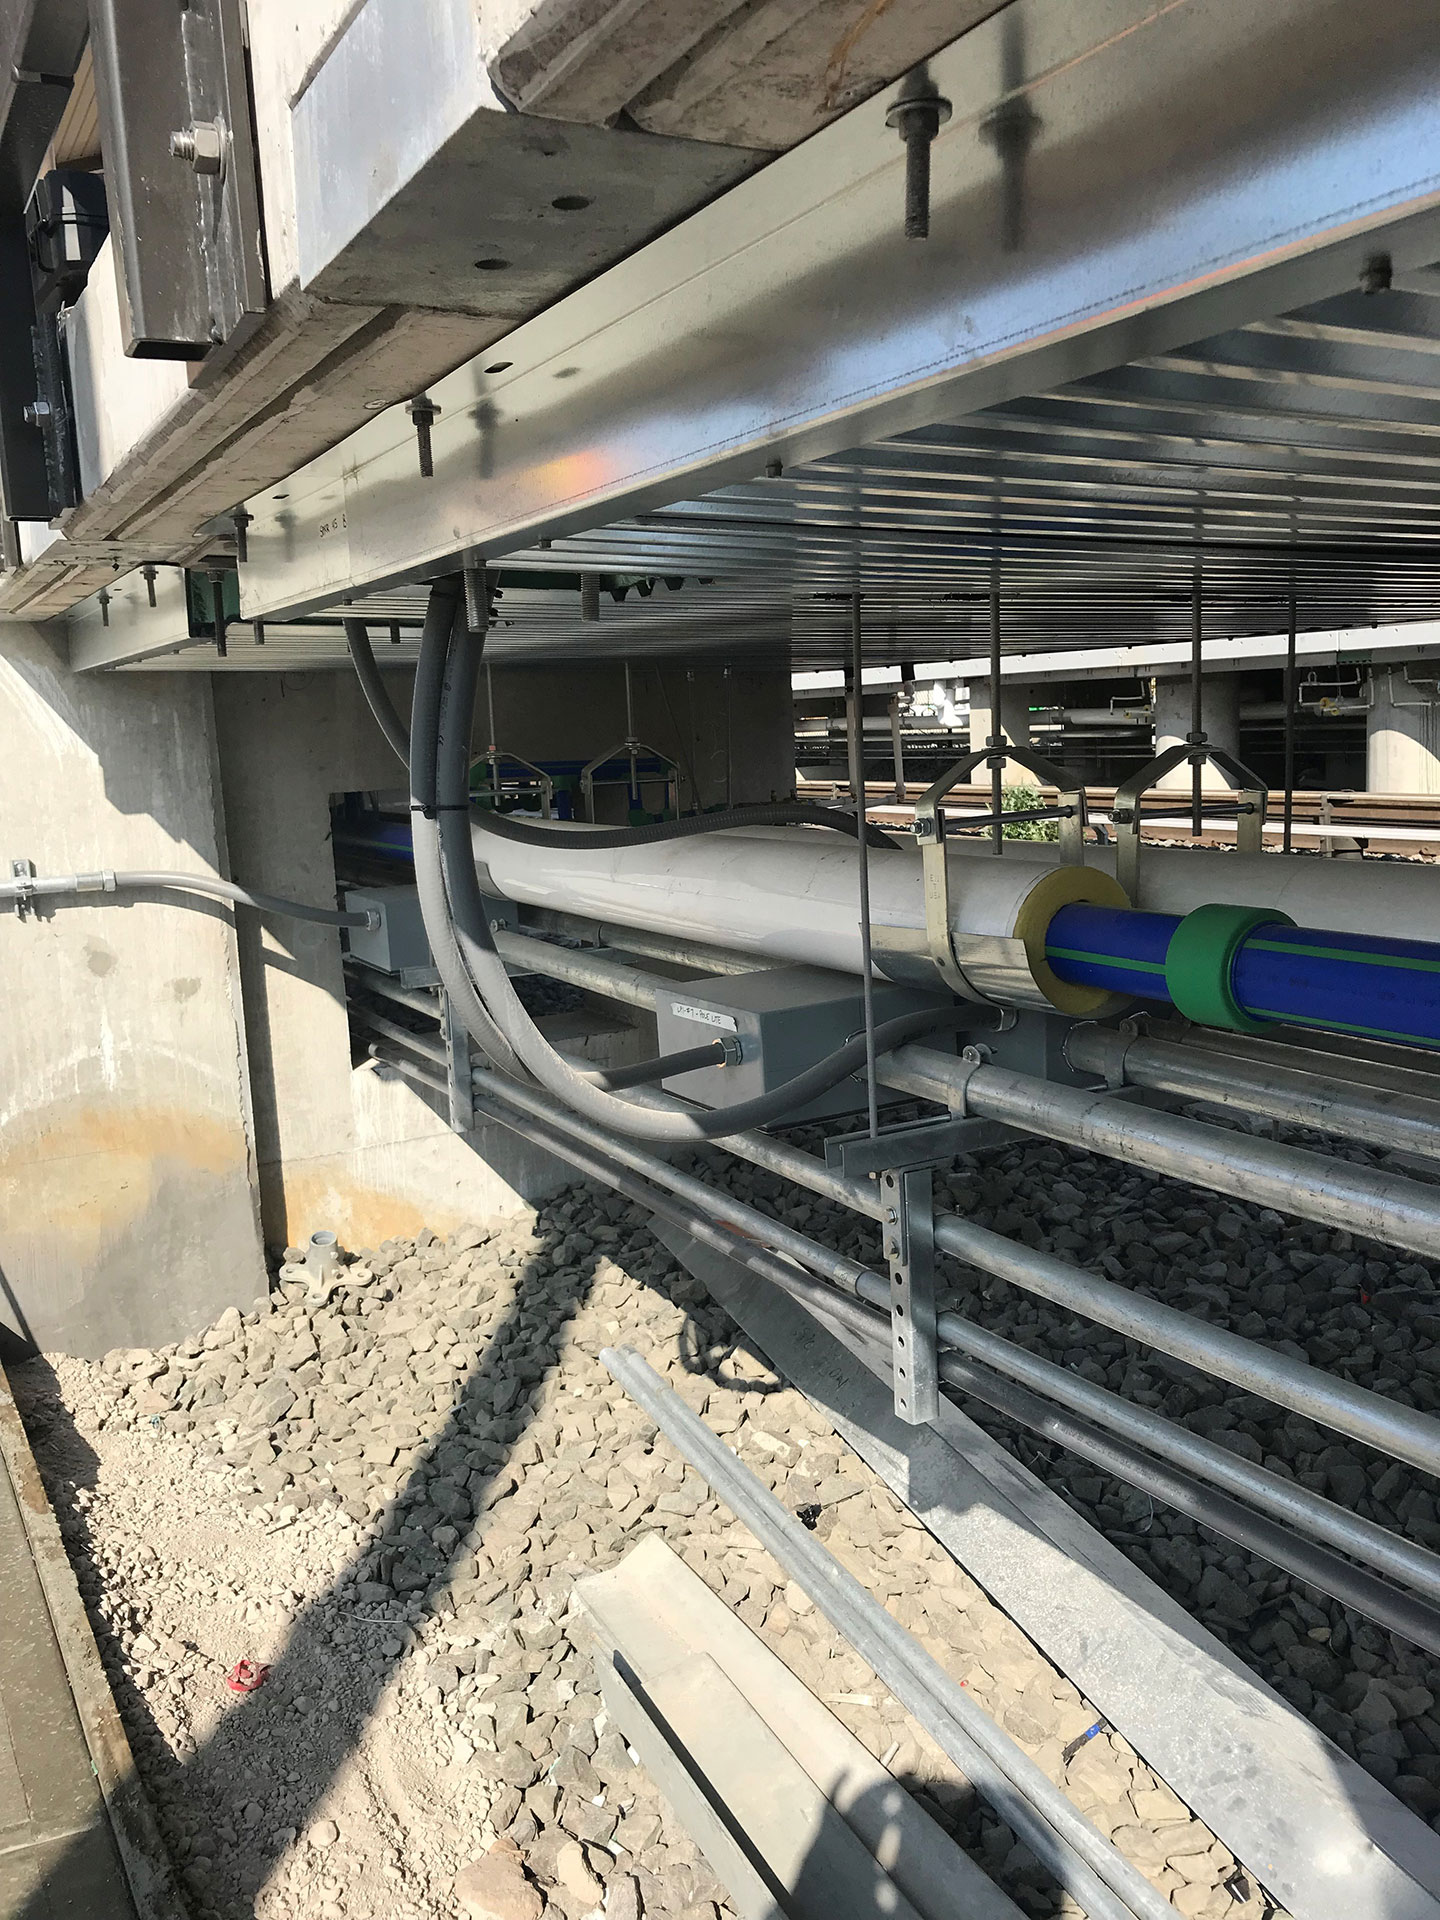 We installed an innovative first-of-its-kind custom snow melt system into the new platforms.